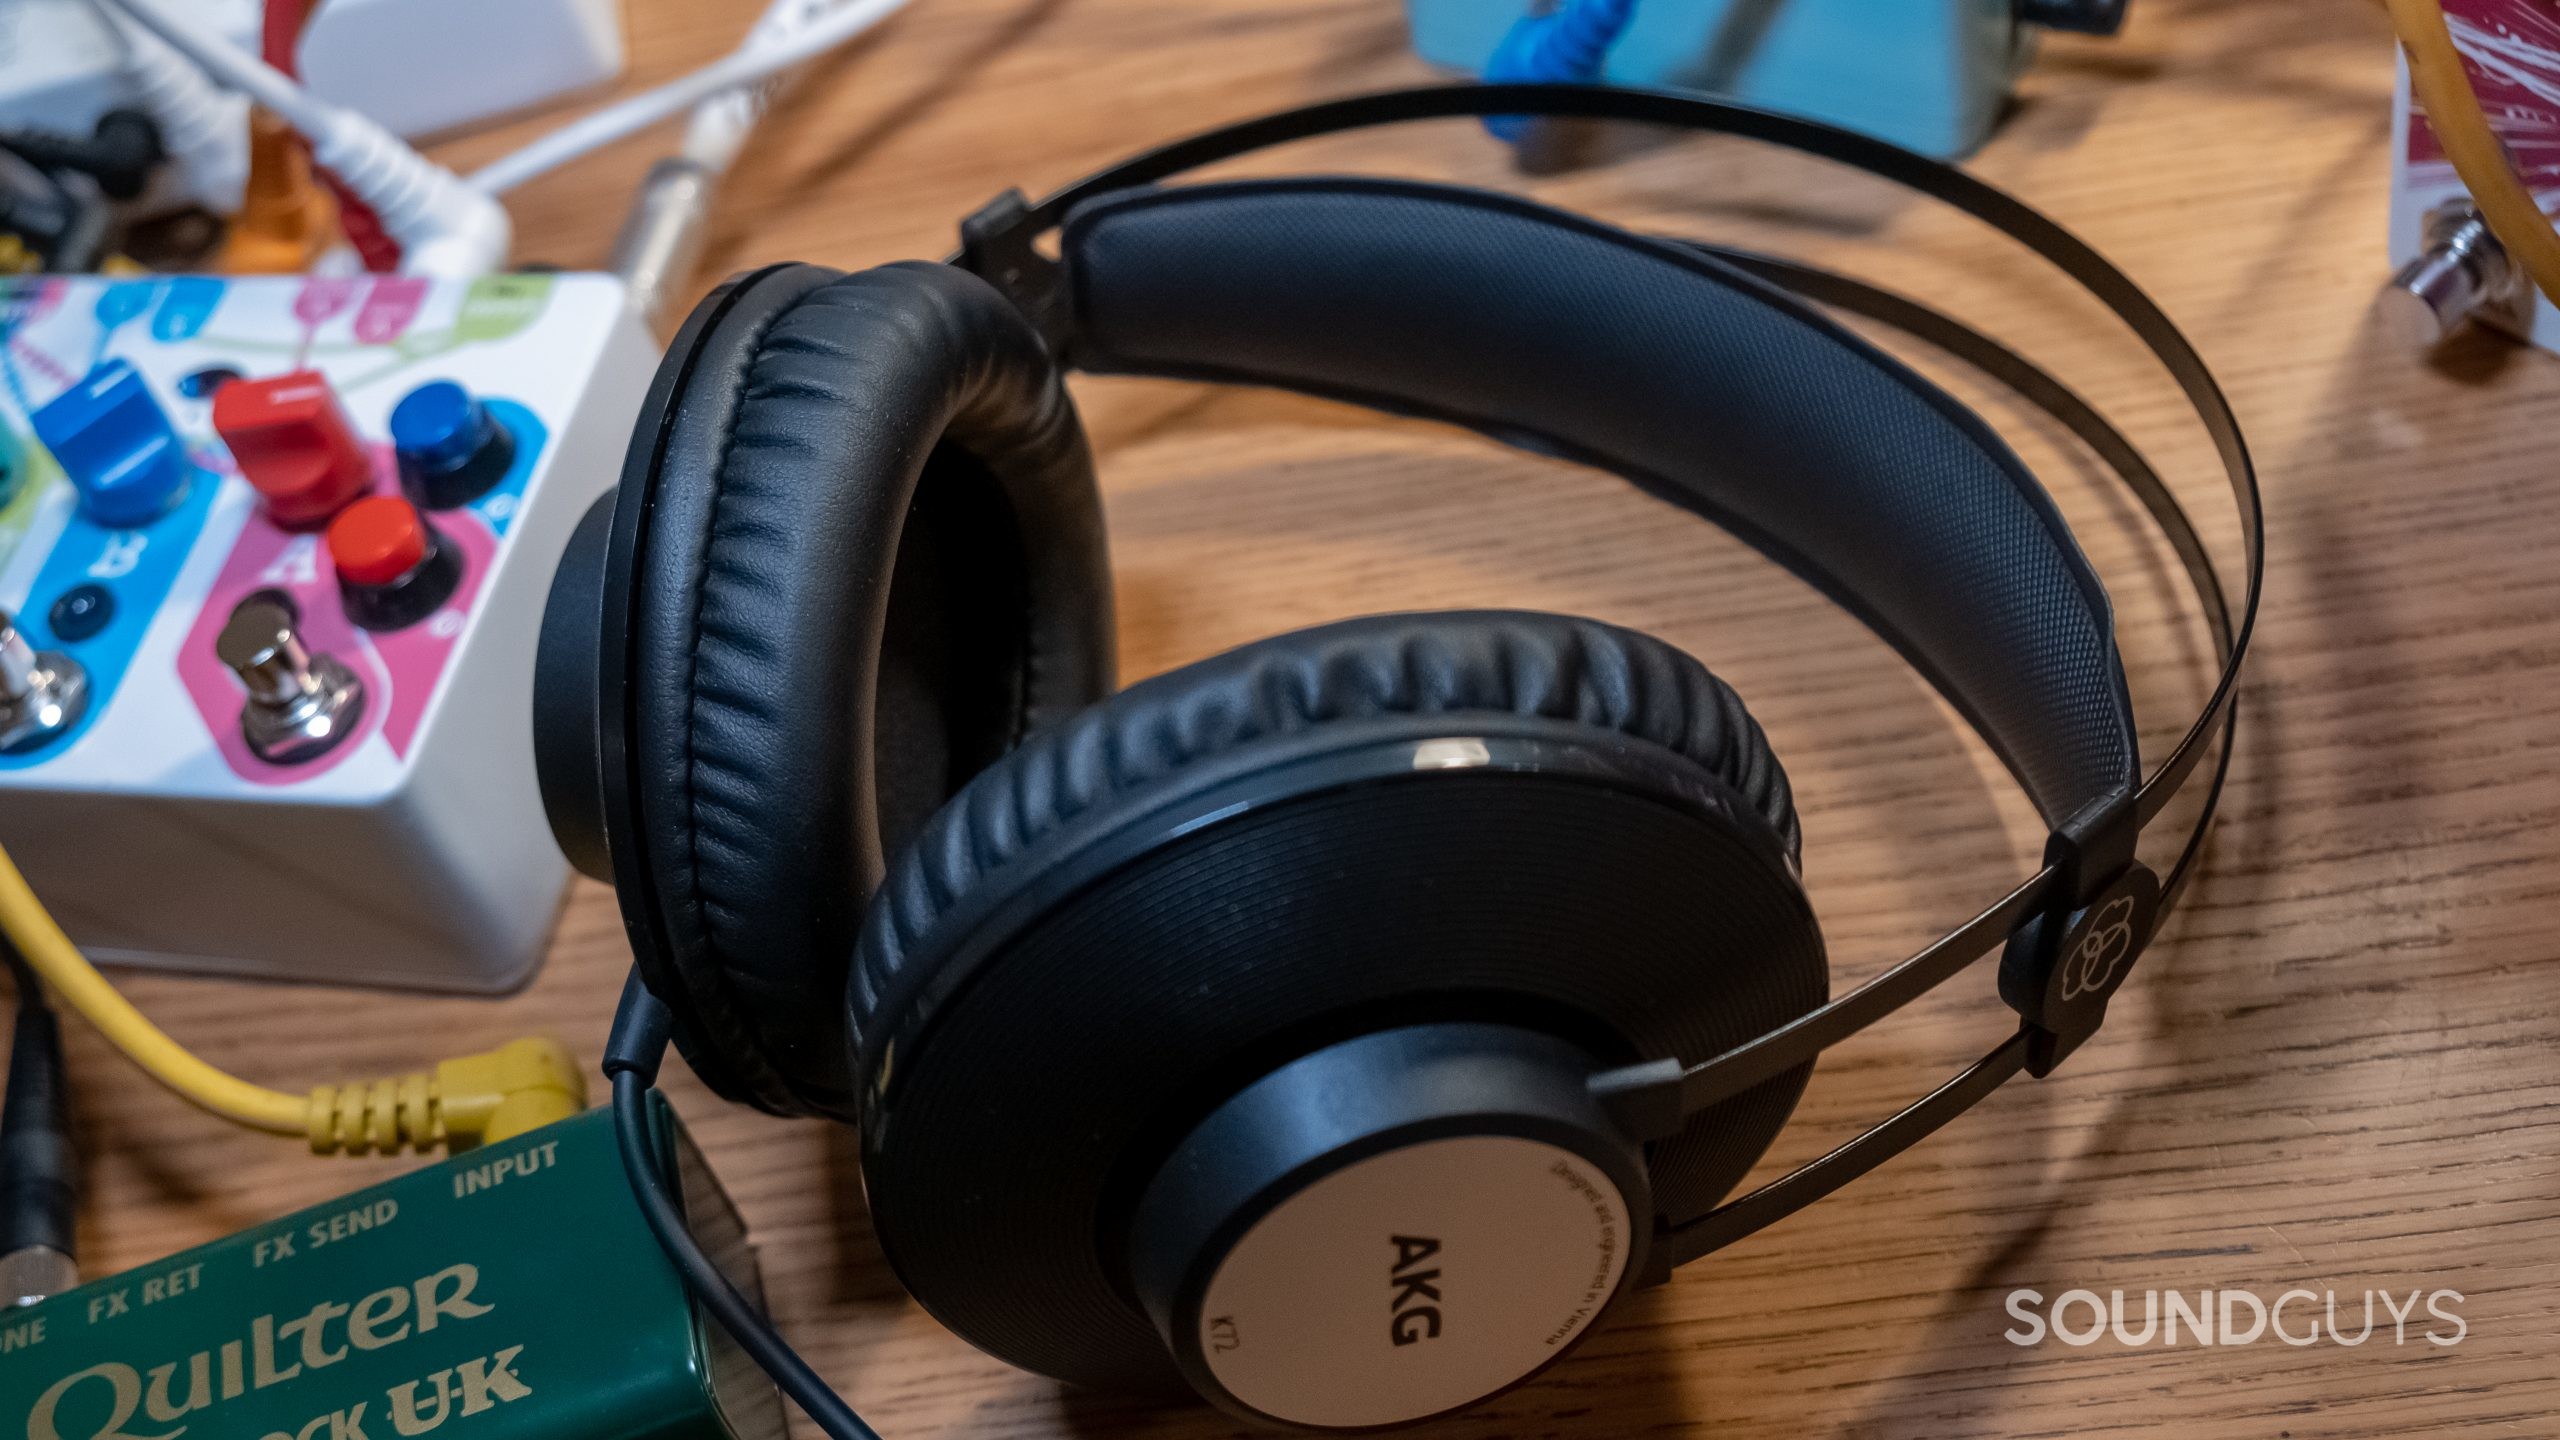 The AKG K72 rests on a wood desk surrounded by music equipment.